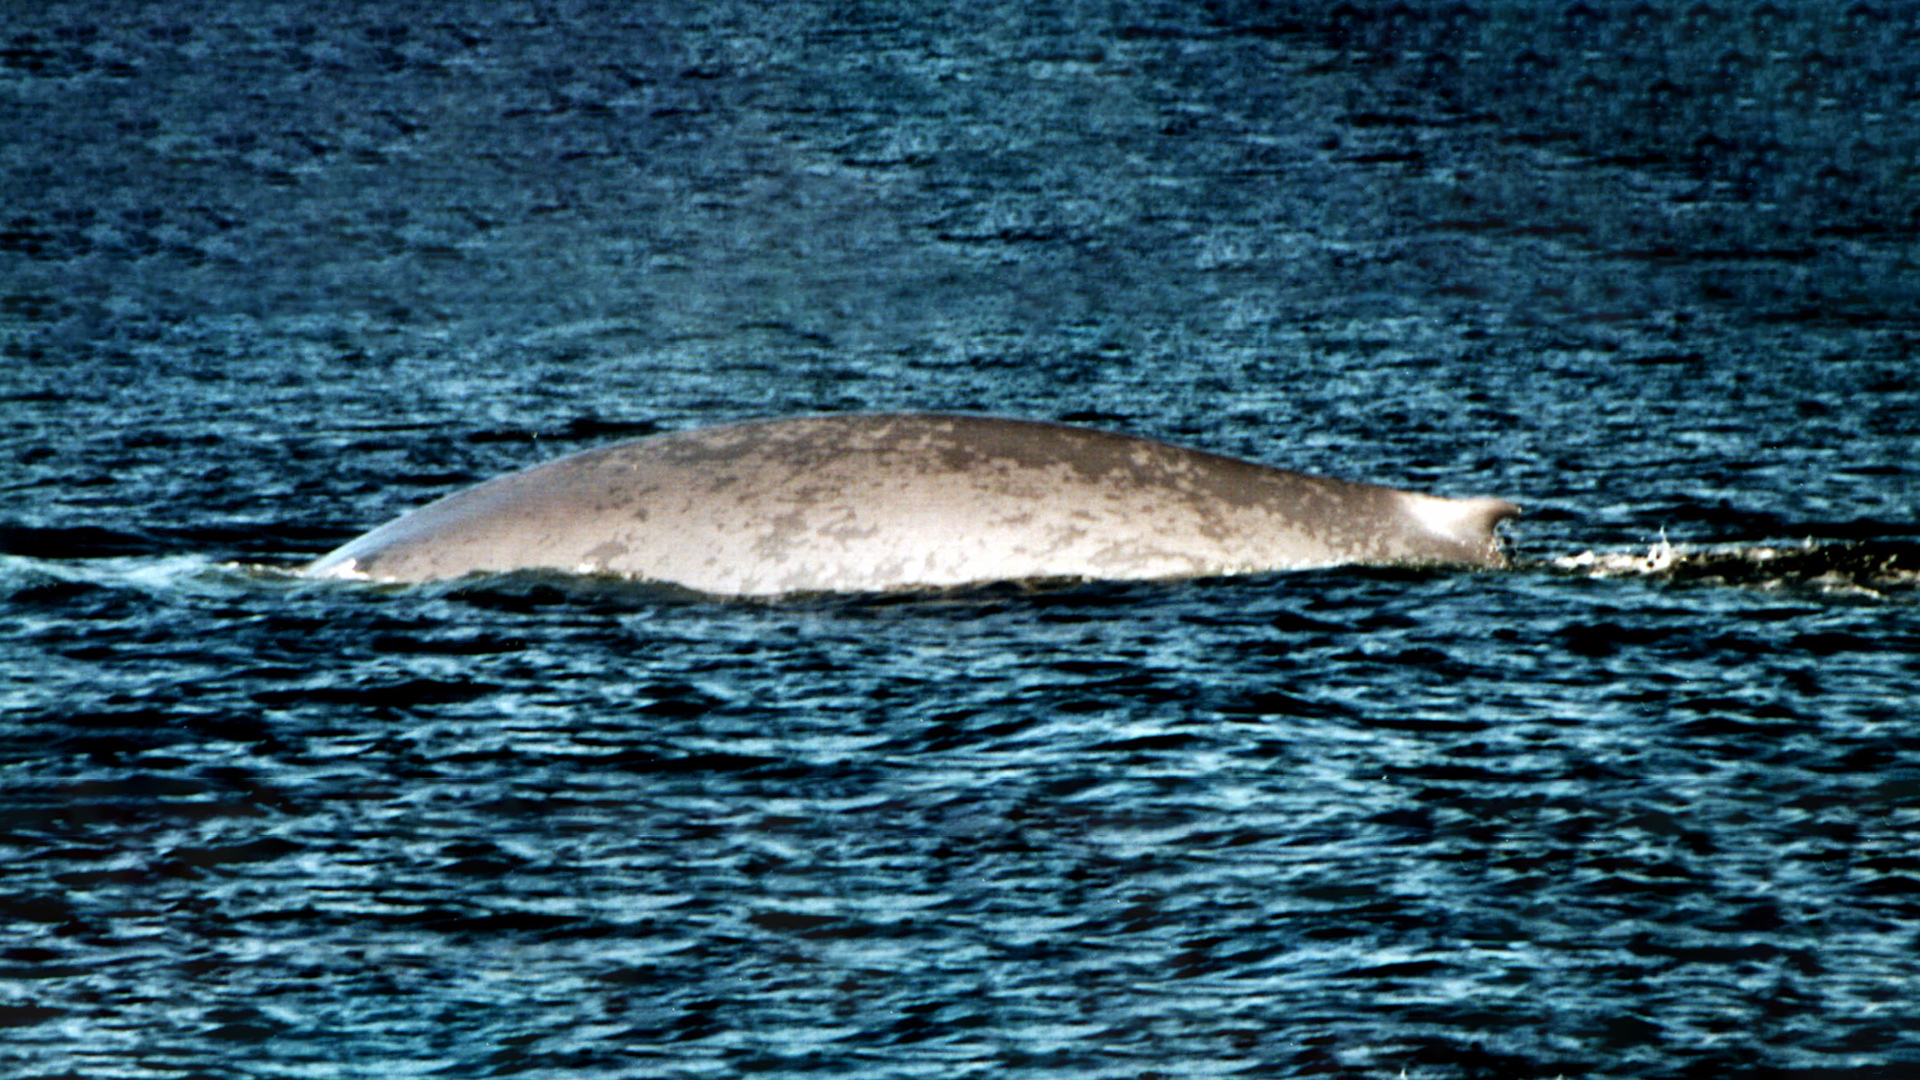 Blue whale showing its back, dorsal fin and left flank